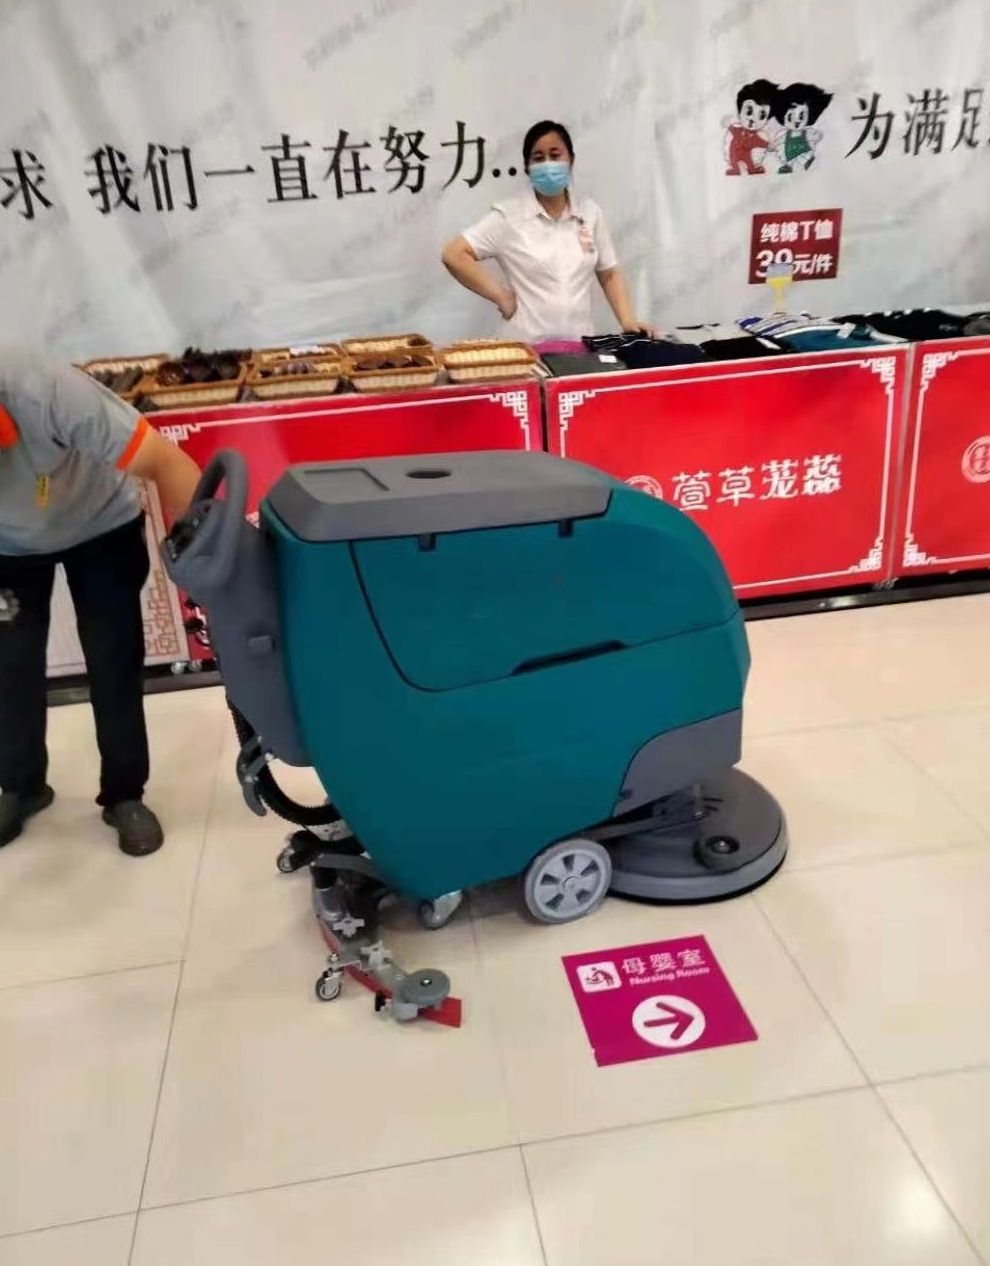 Hand pushed industrial floor washer delivers goods to the door, supports Cash on delivery, and ensures sufficient inventory